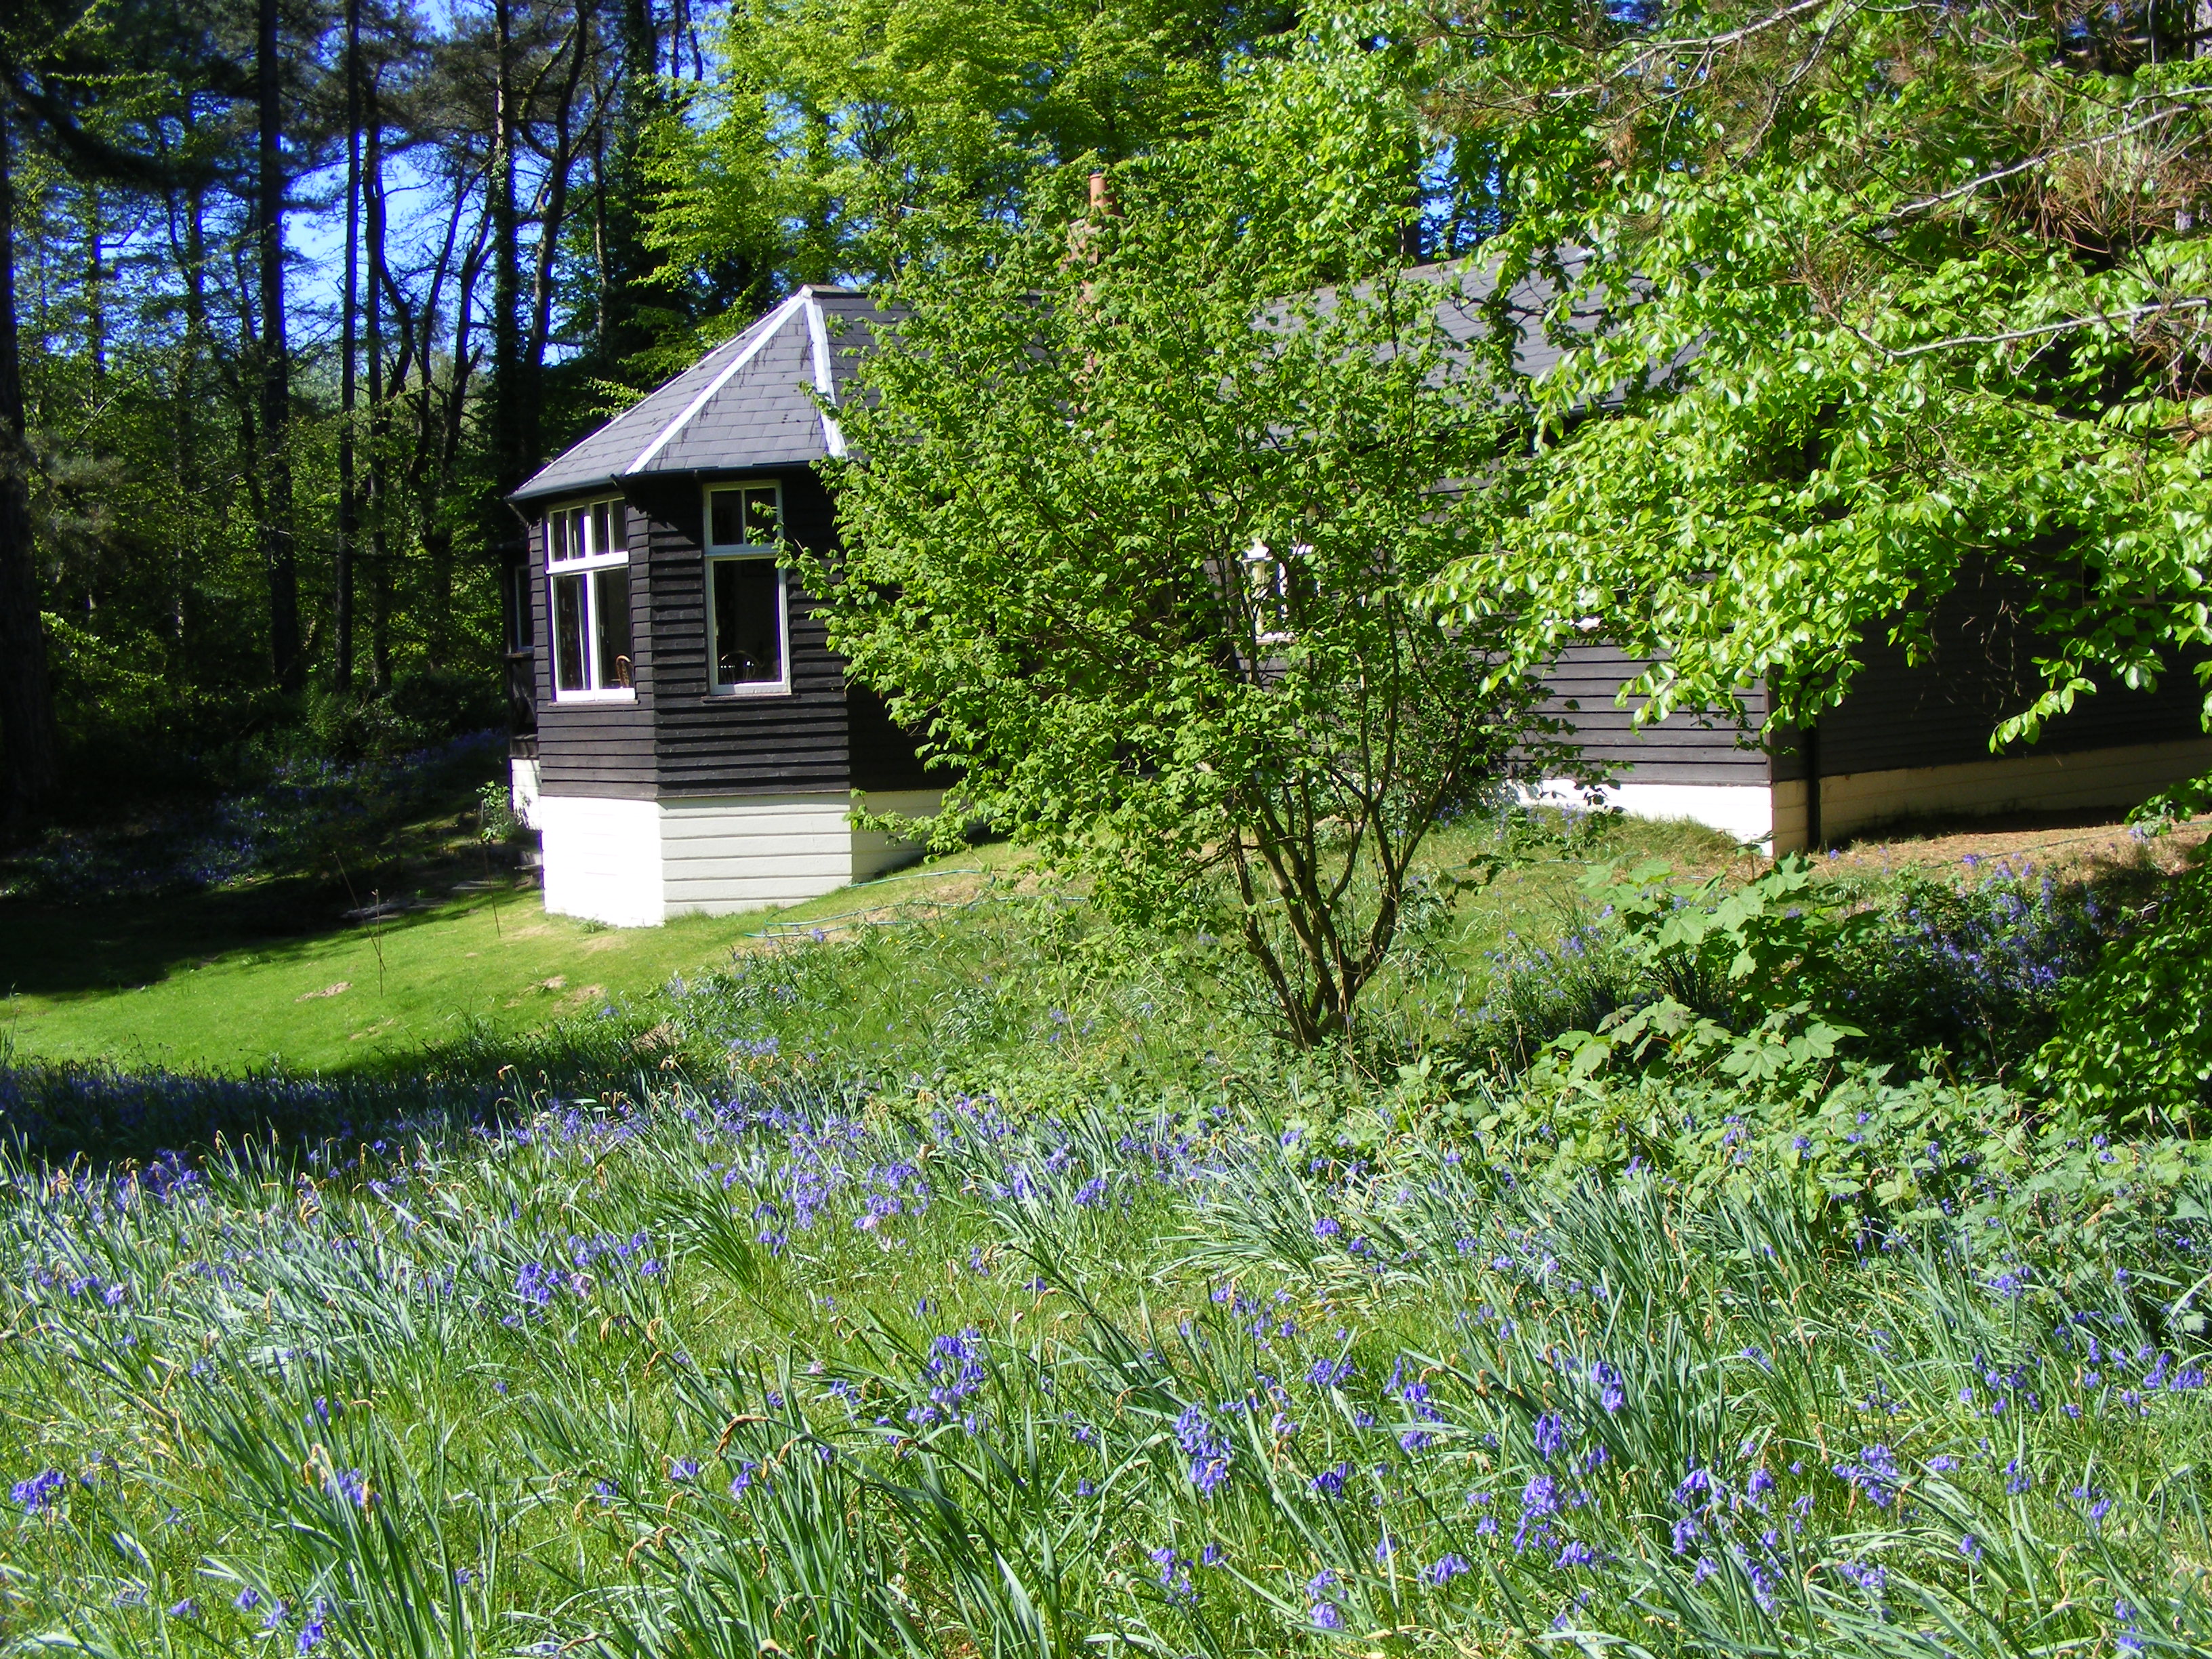 Windy Gap close up with bluebells